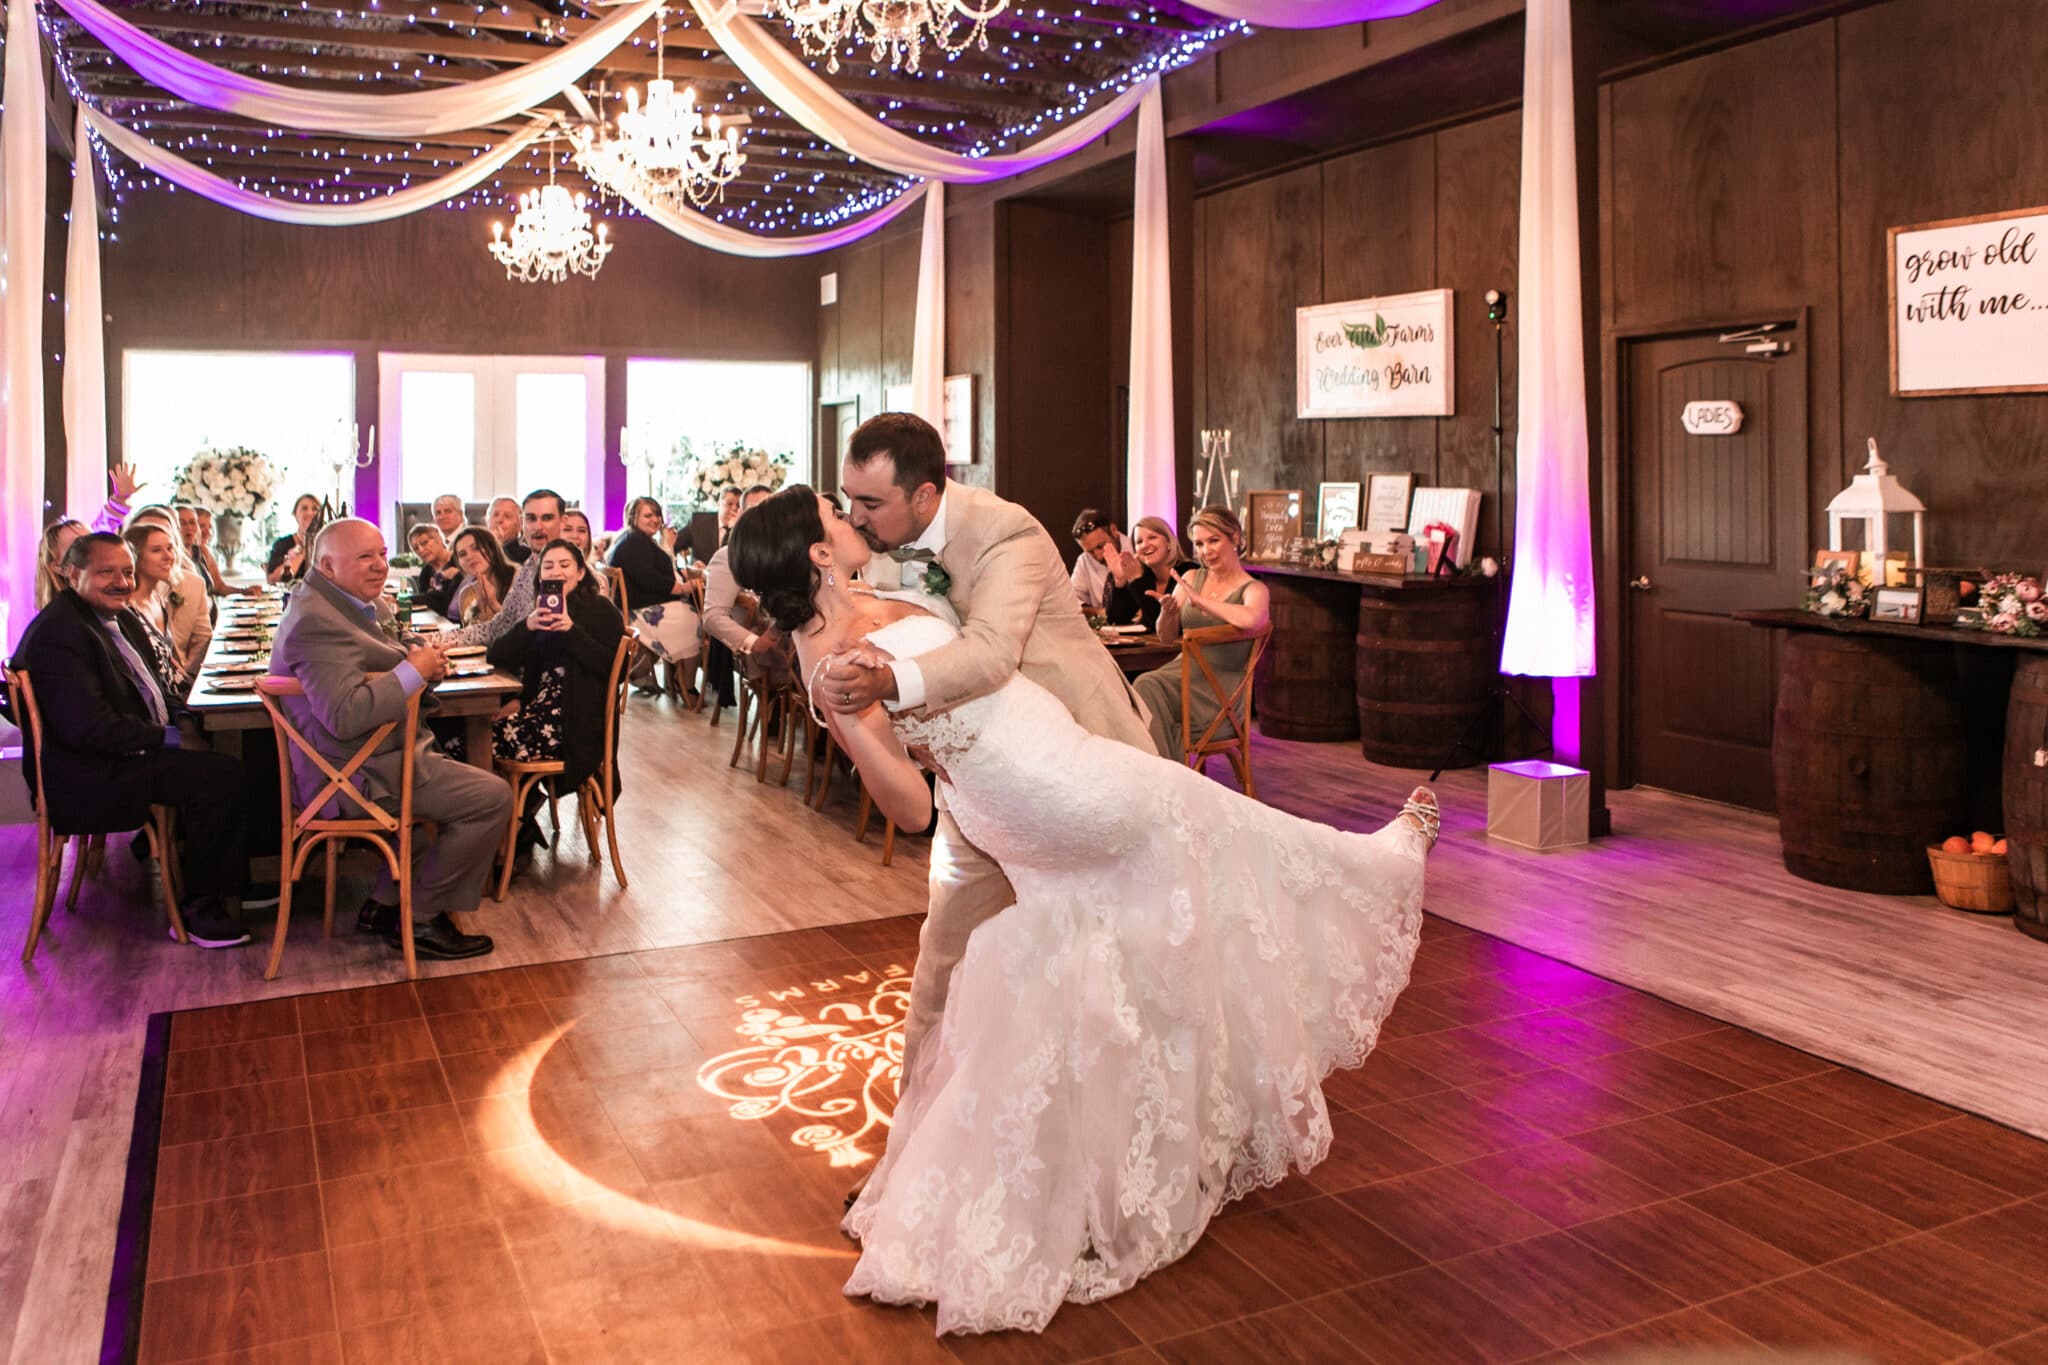 the groom dipping his bride during the first dance during the classic barn wedding.